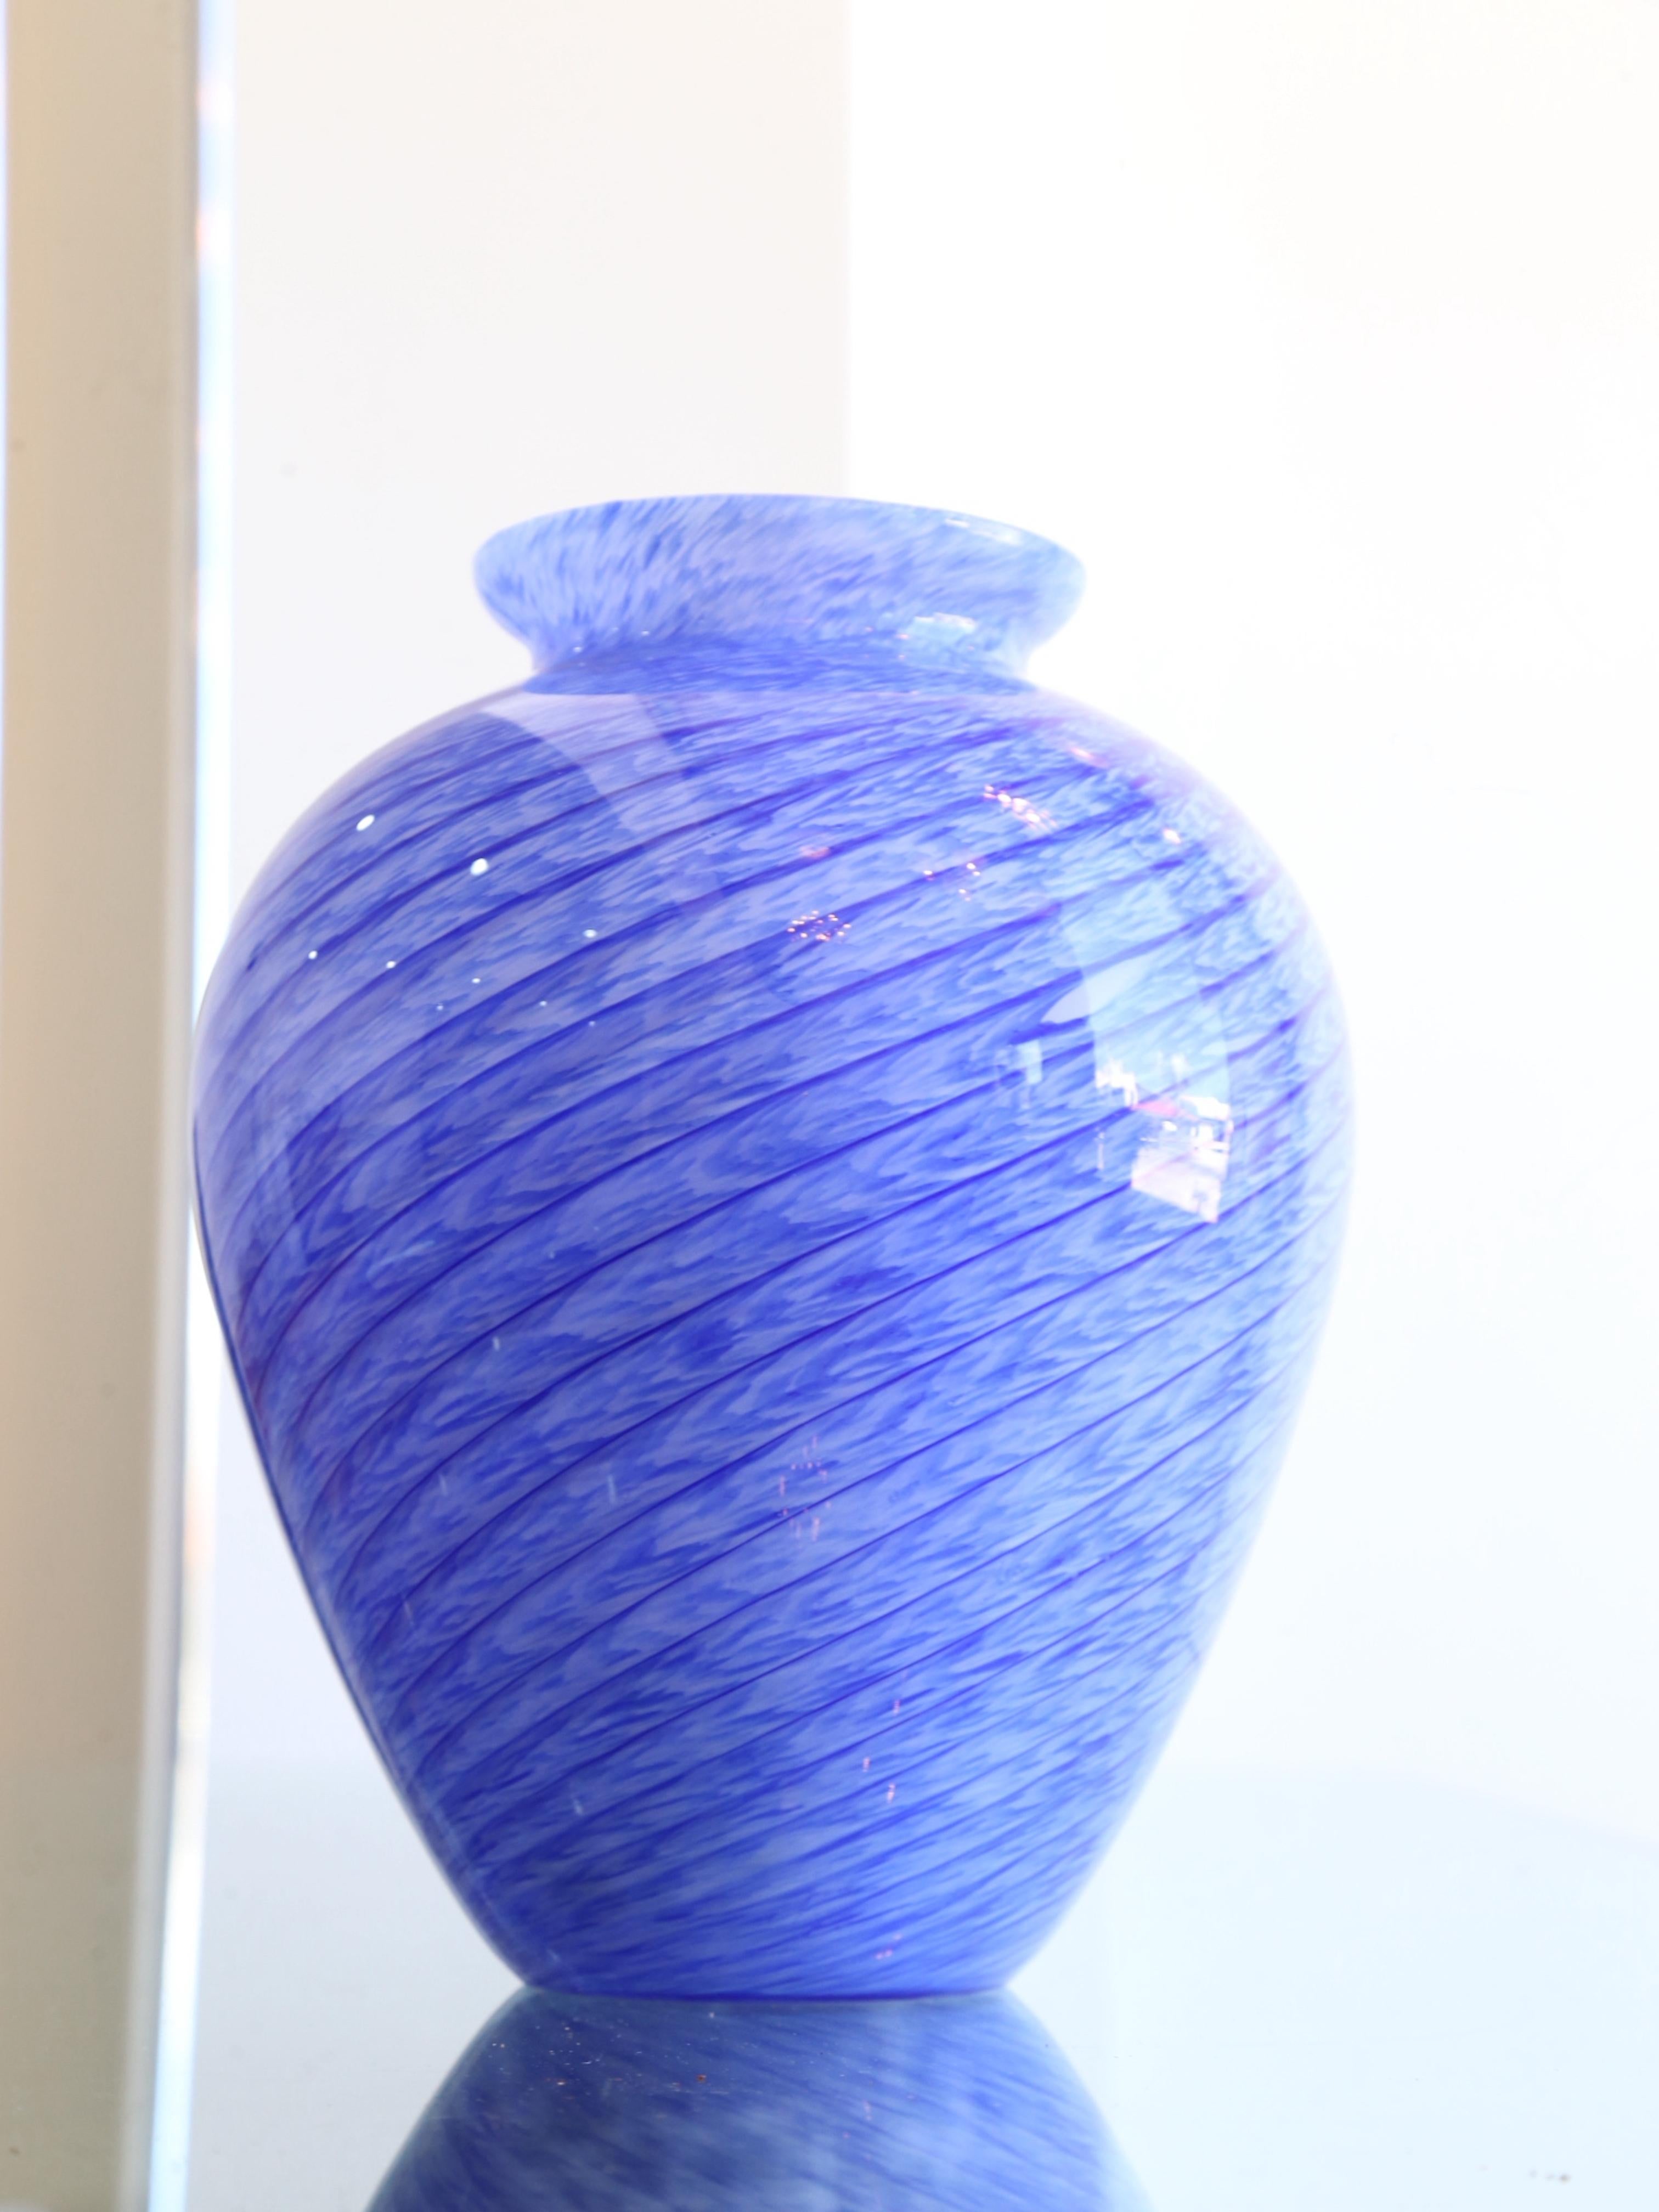 Hand-Crafted Italian Handmade Murano Glass Blue Vase, 1960s For Sale